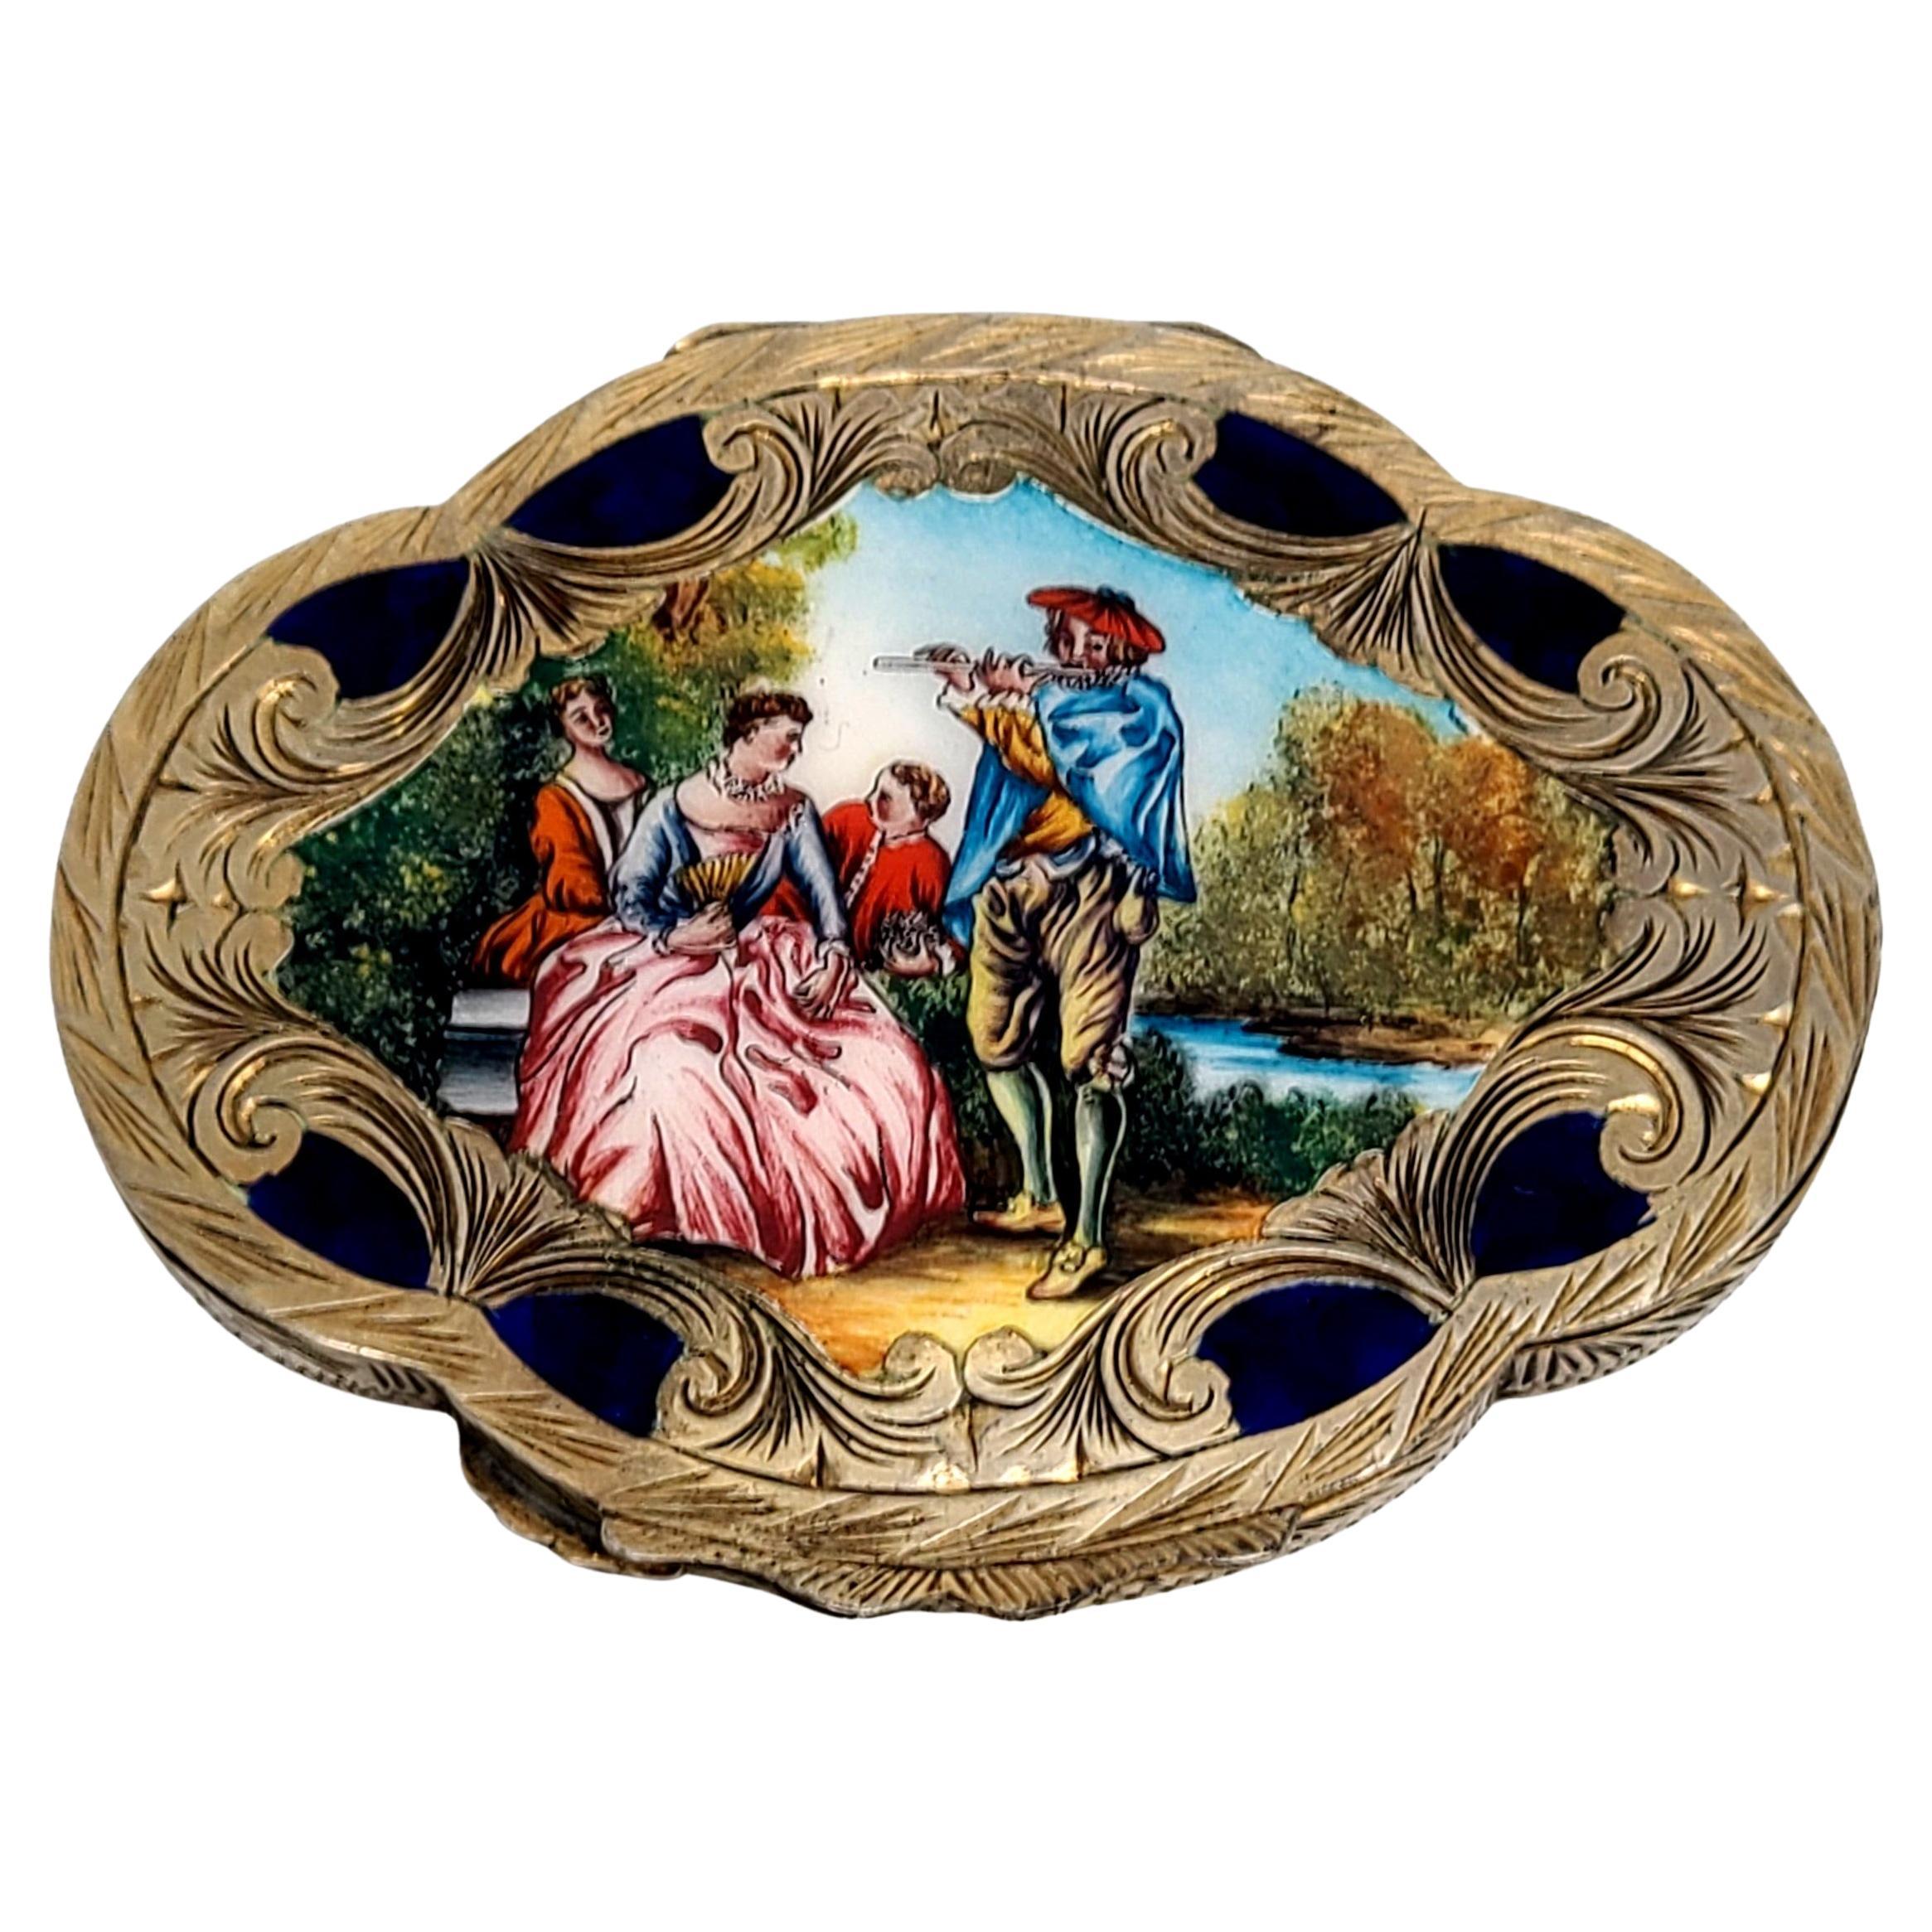 Italian 800 Silver Gold Vermeil Hand Painted Enamel Compact